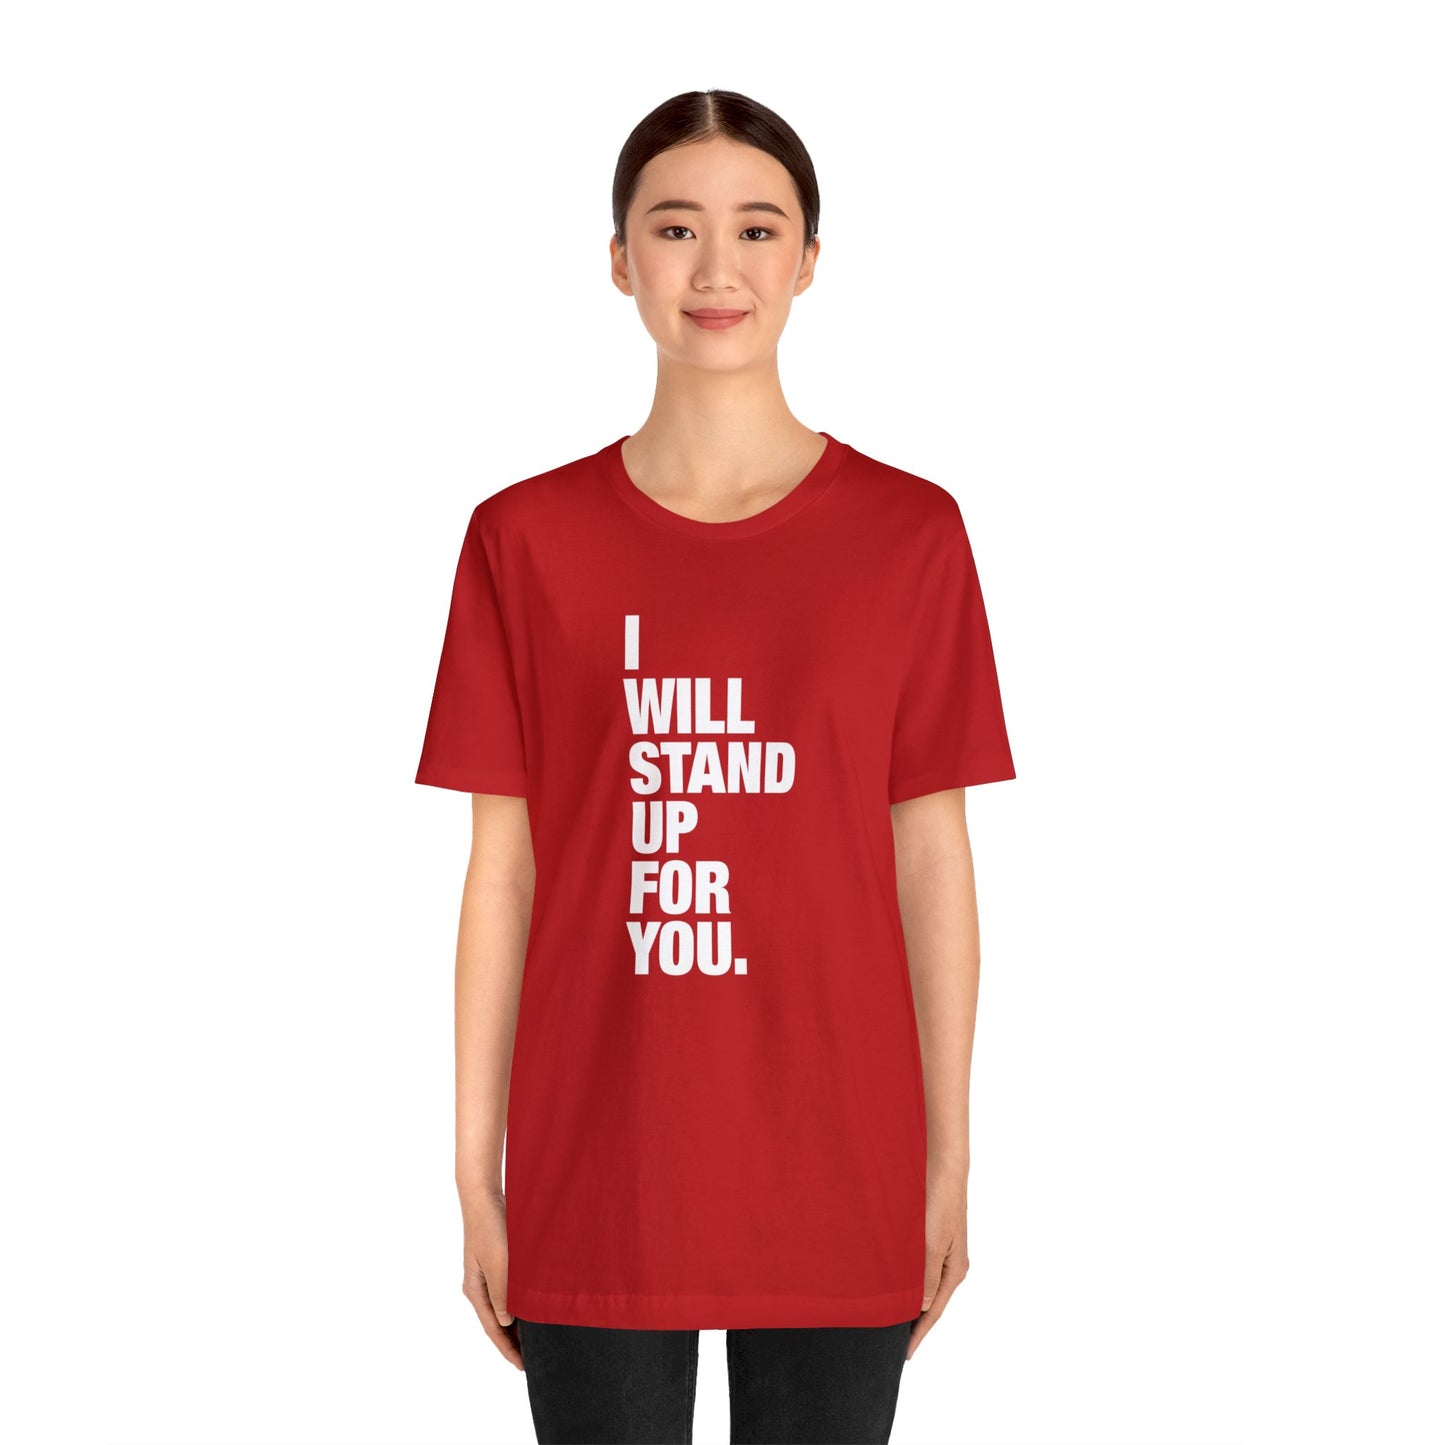 I Will Stand Up for You [T-Shirt]